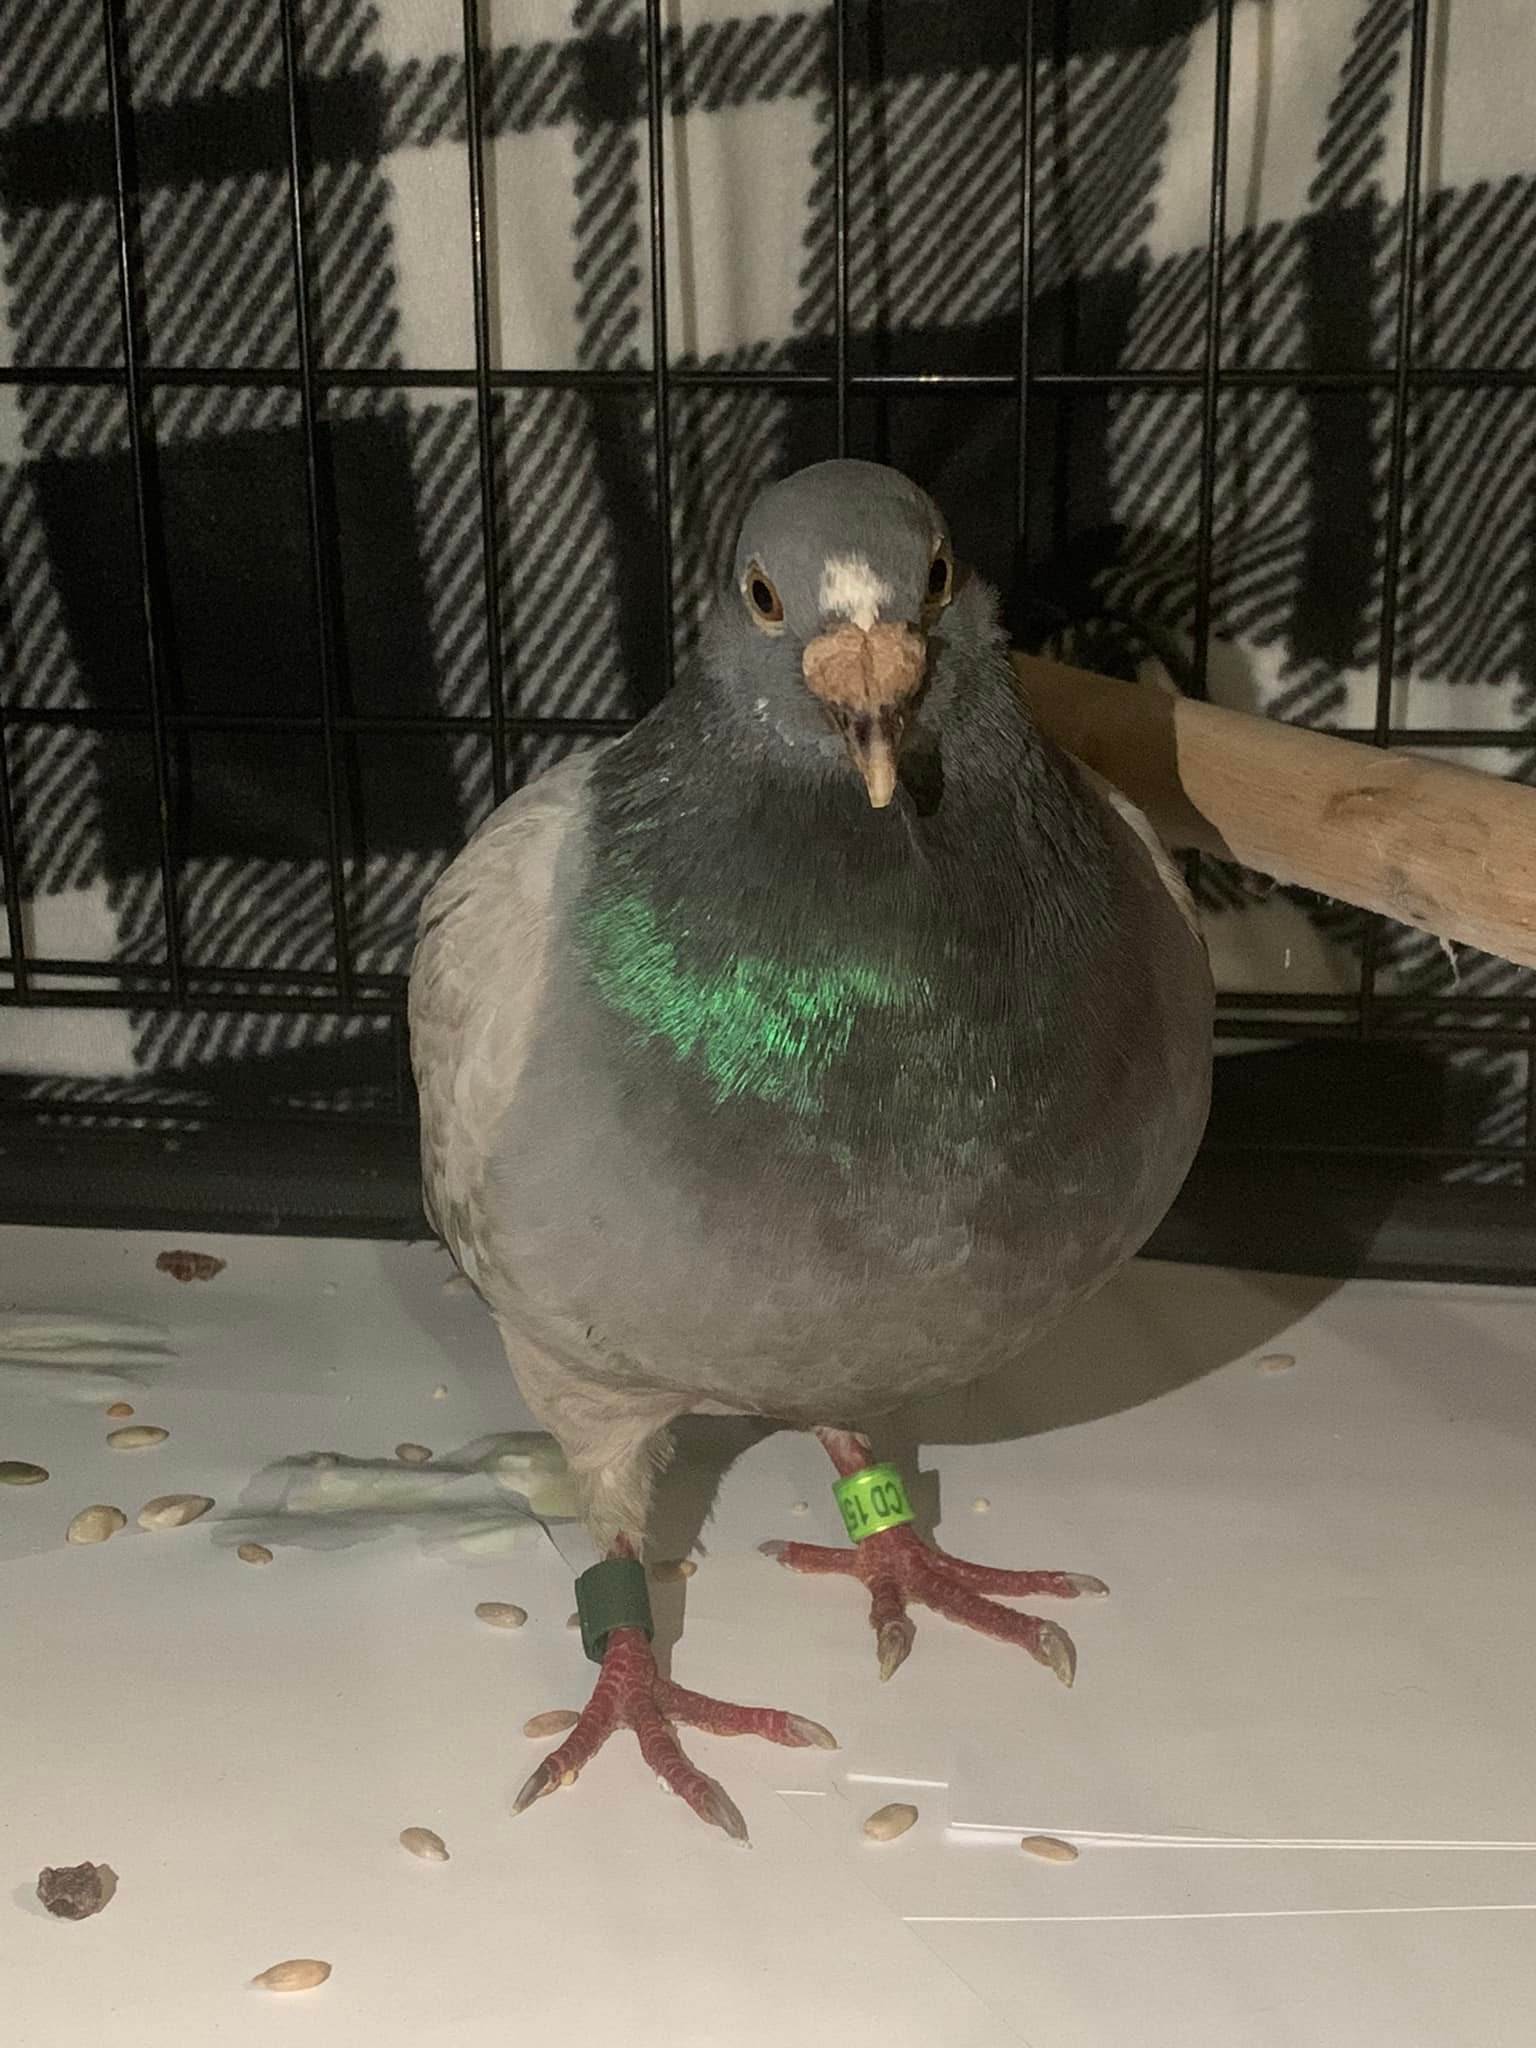 bob the homing pigeon standing outside of a cage with bird food scattered around his feet.